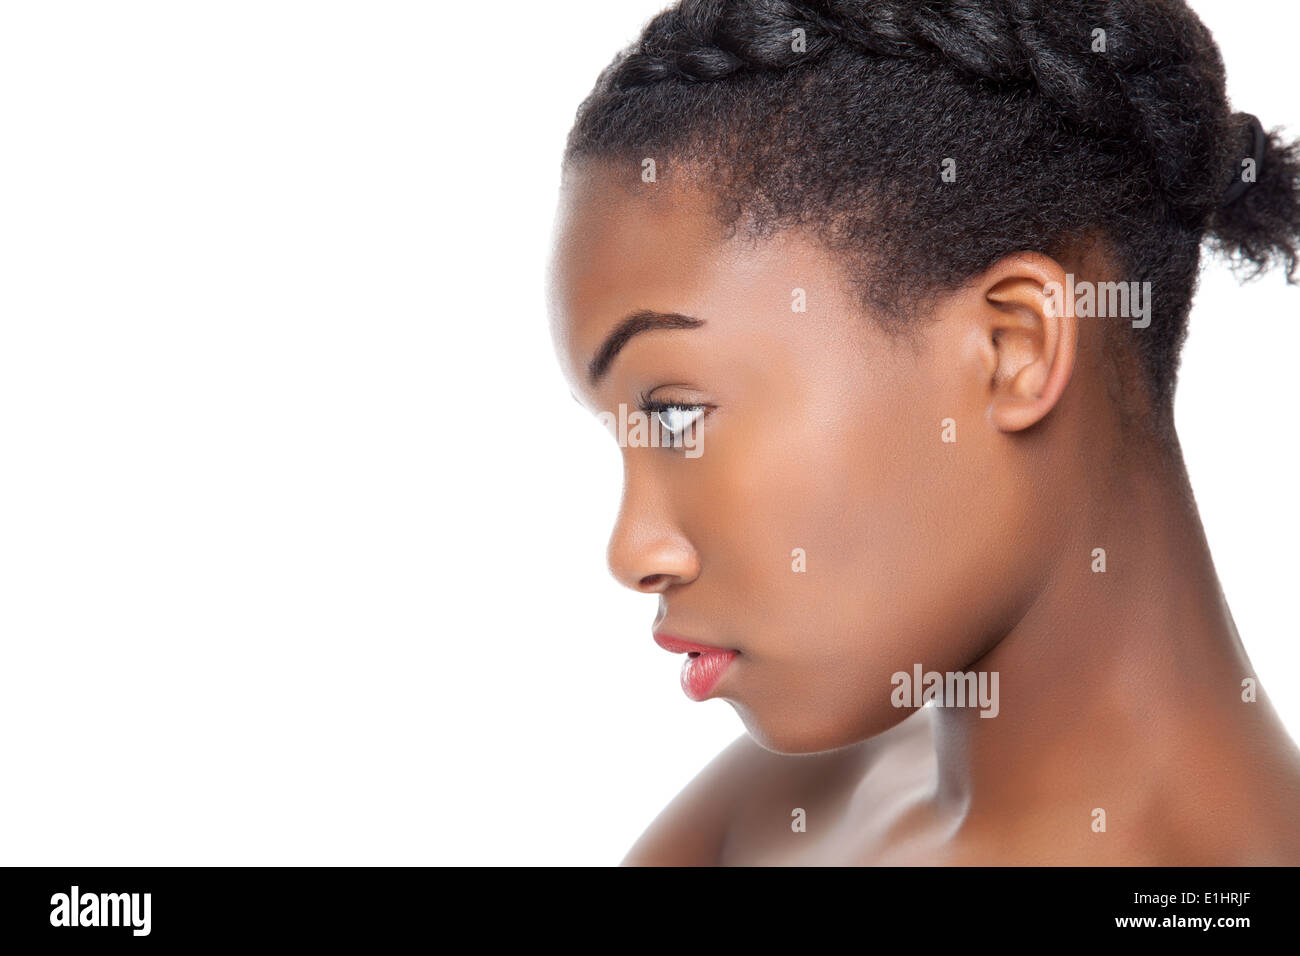 Profile view of a young black beauty Stock Photo